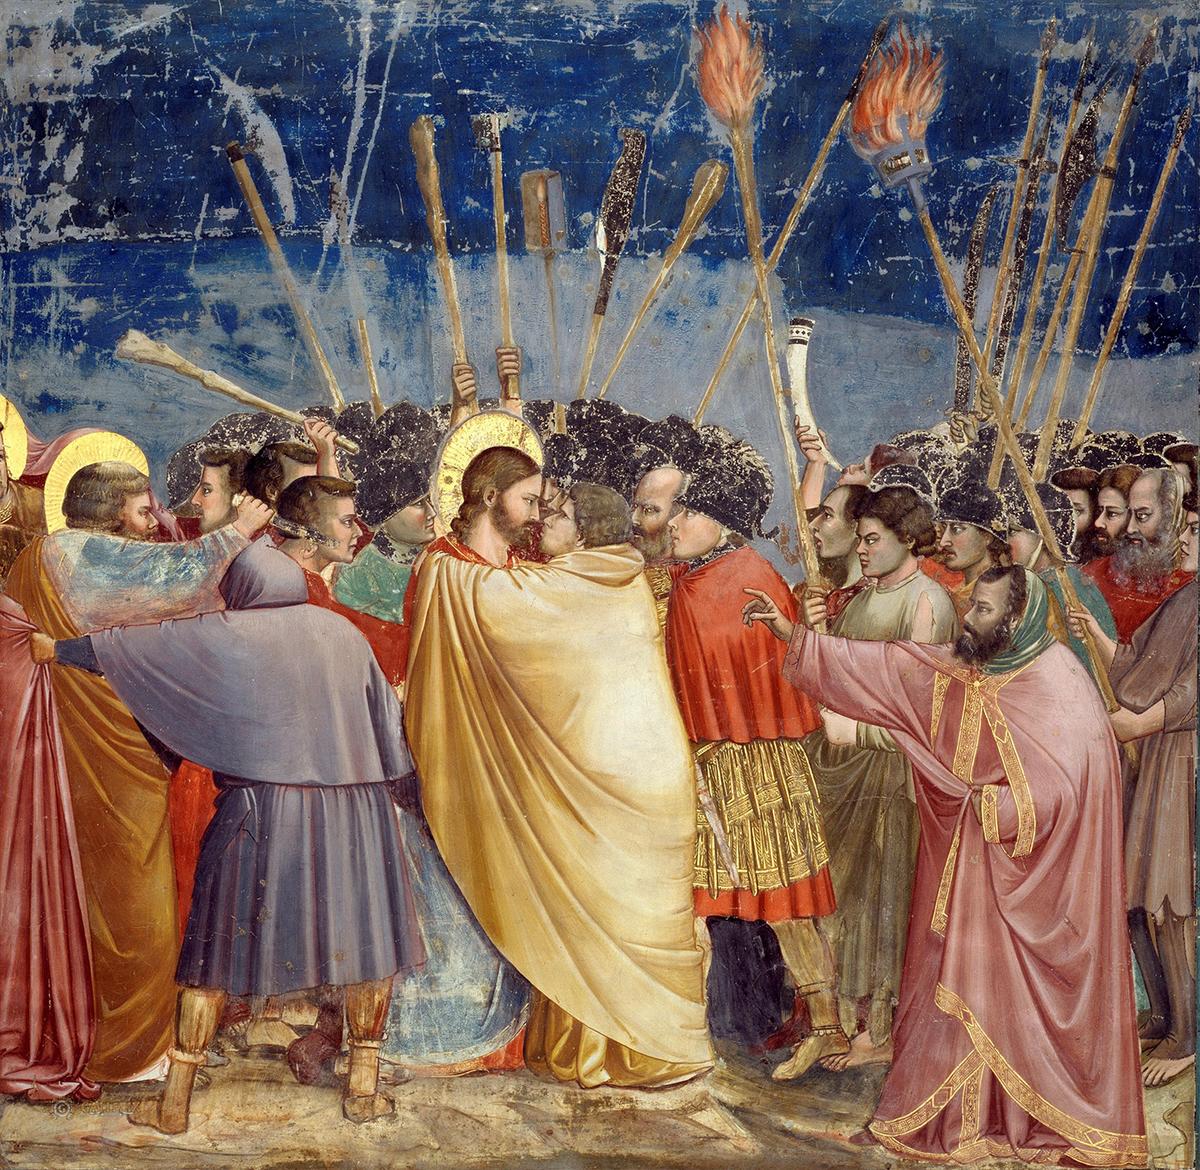 “The Arrest of Christ (Kiss of Judas)” from the Cycle of the Life of Joachim, between 1303 and 1306, by Giotto. Fresco. Scrovegni Chapel, Padua, Italy. (Public Domain)